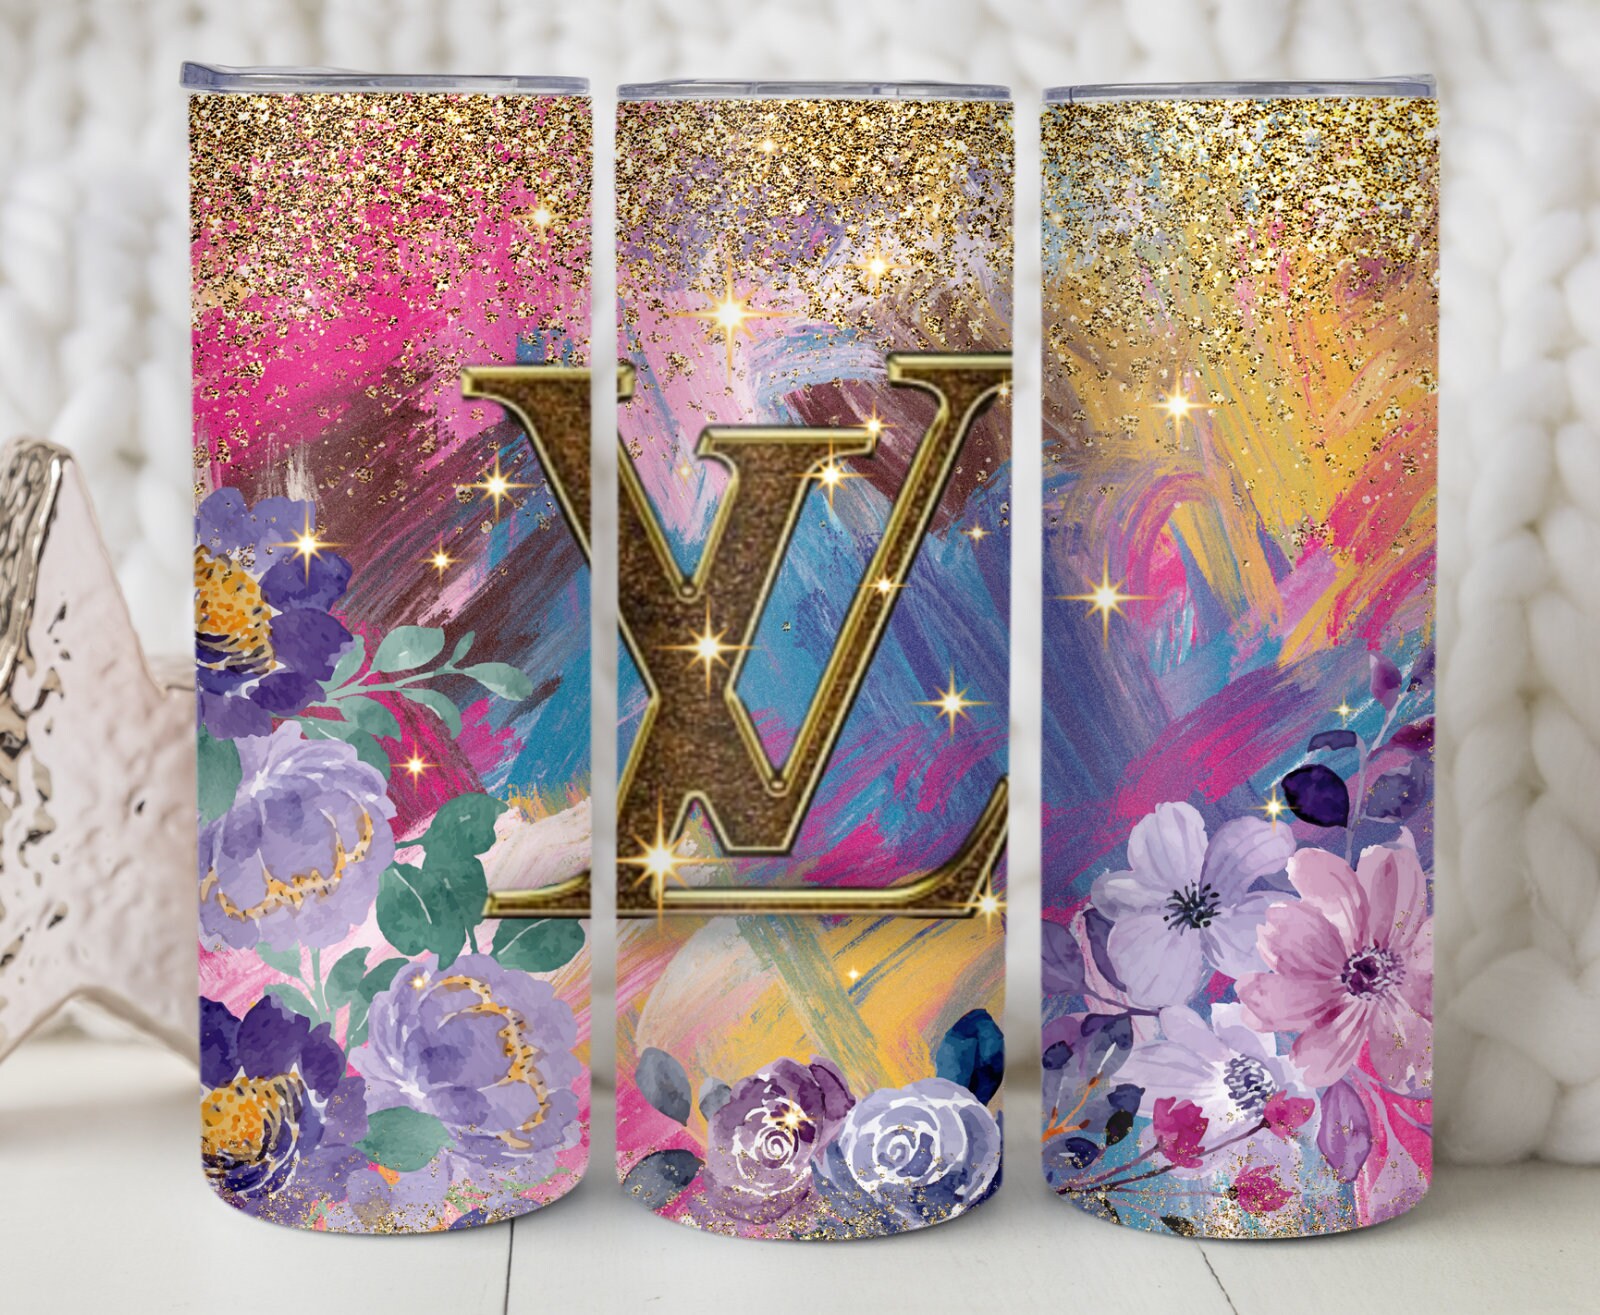 Love me some lv  Iphone wallpaper glitter, Louis vuitton iphone wallpaper,  Wallpaper iphone cute